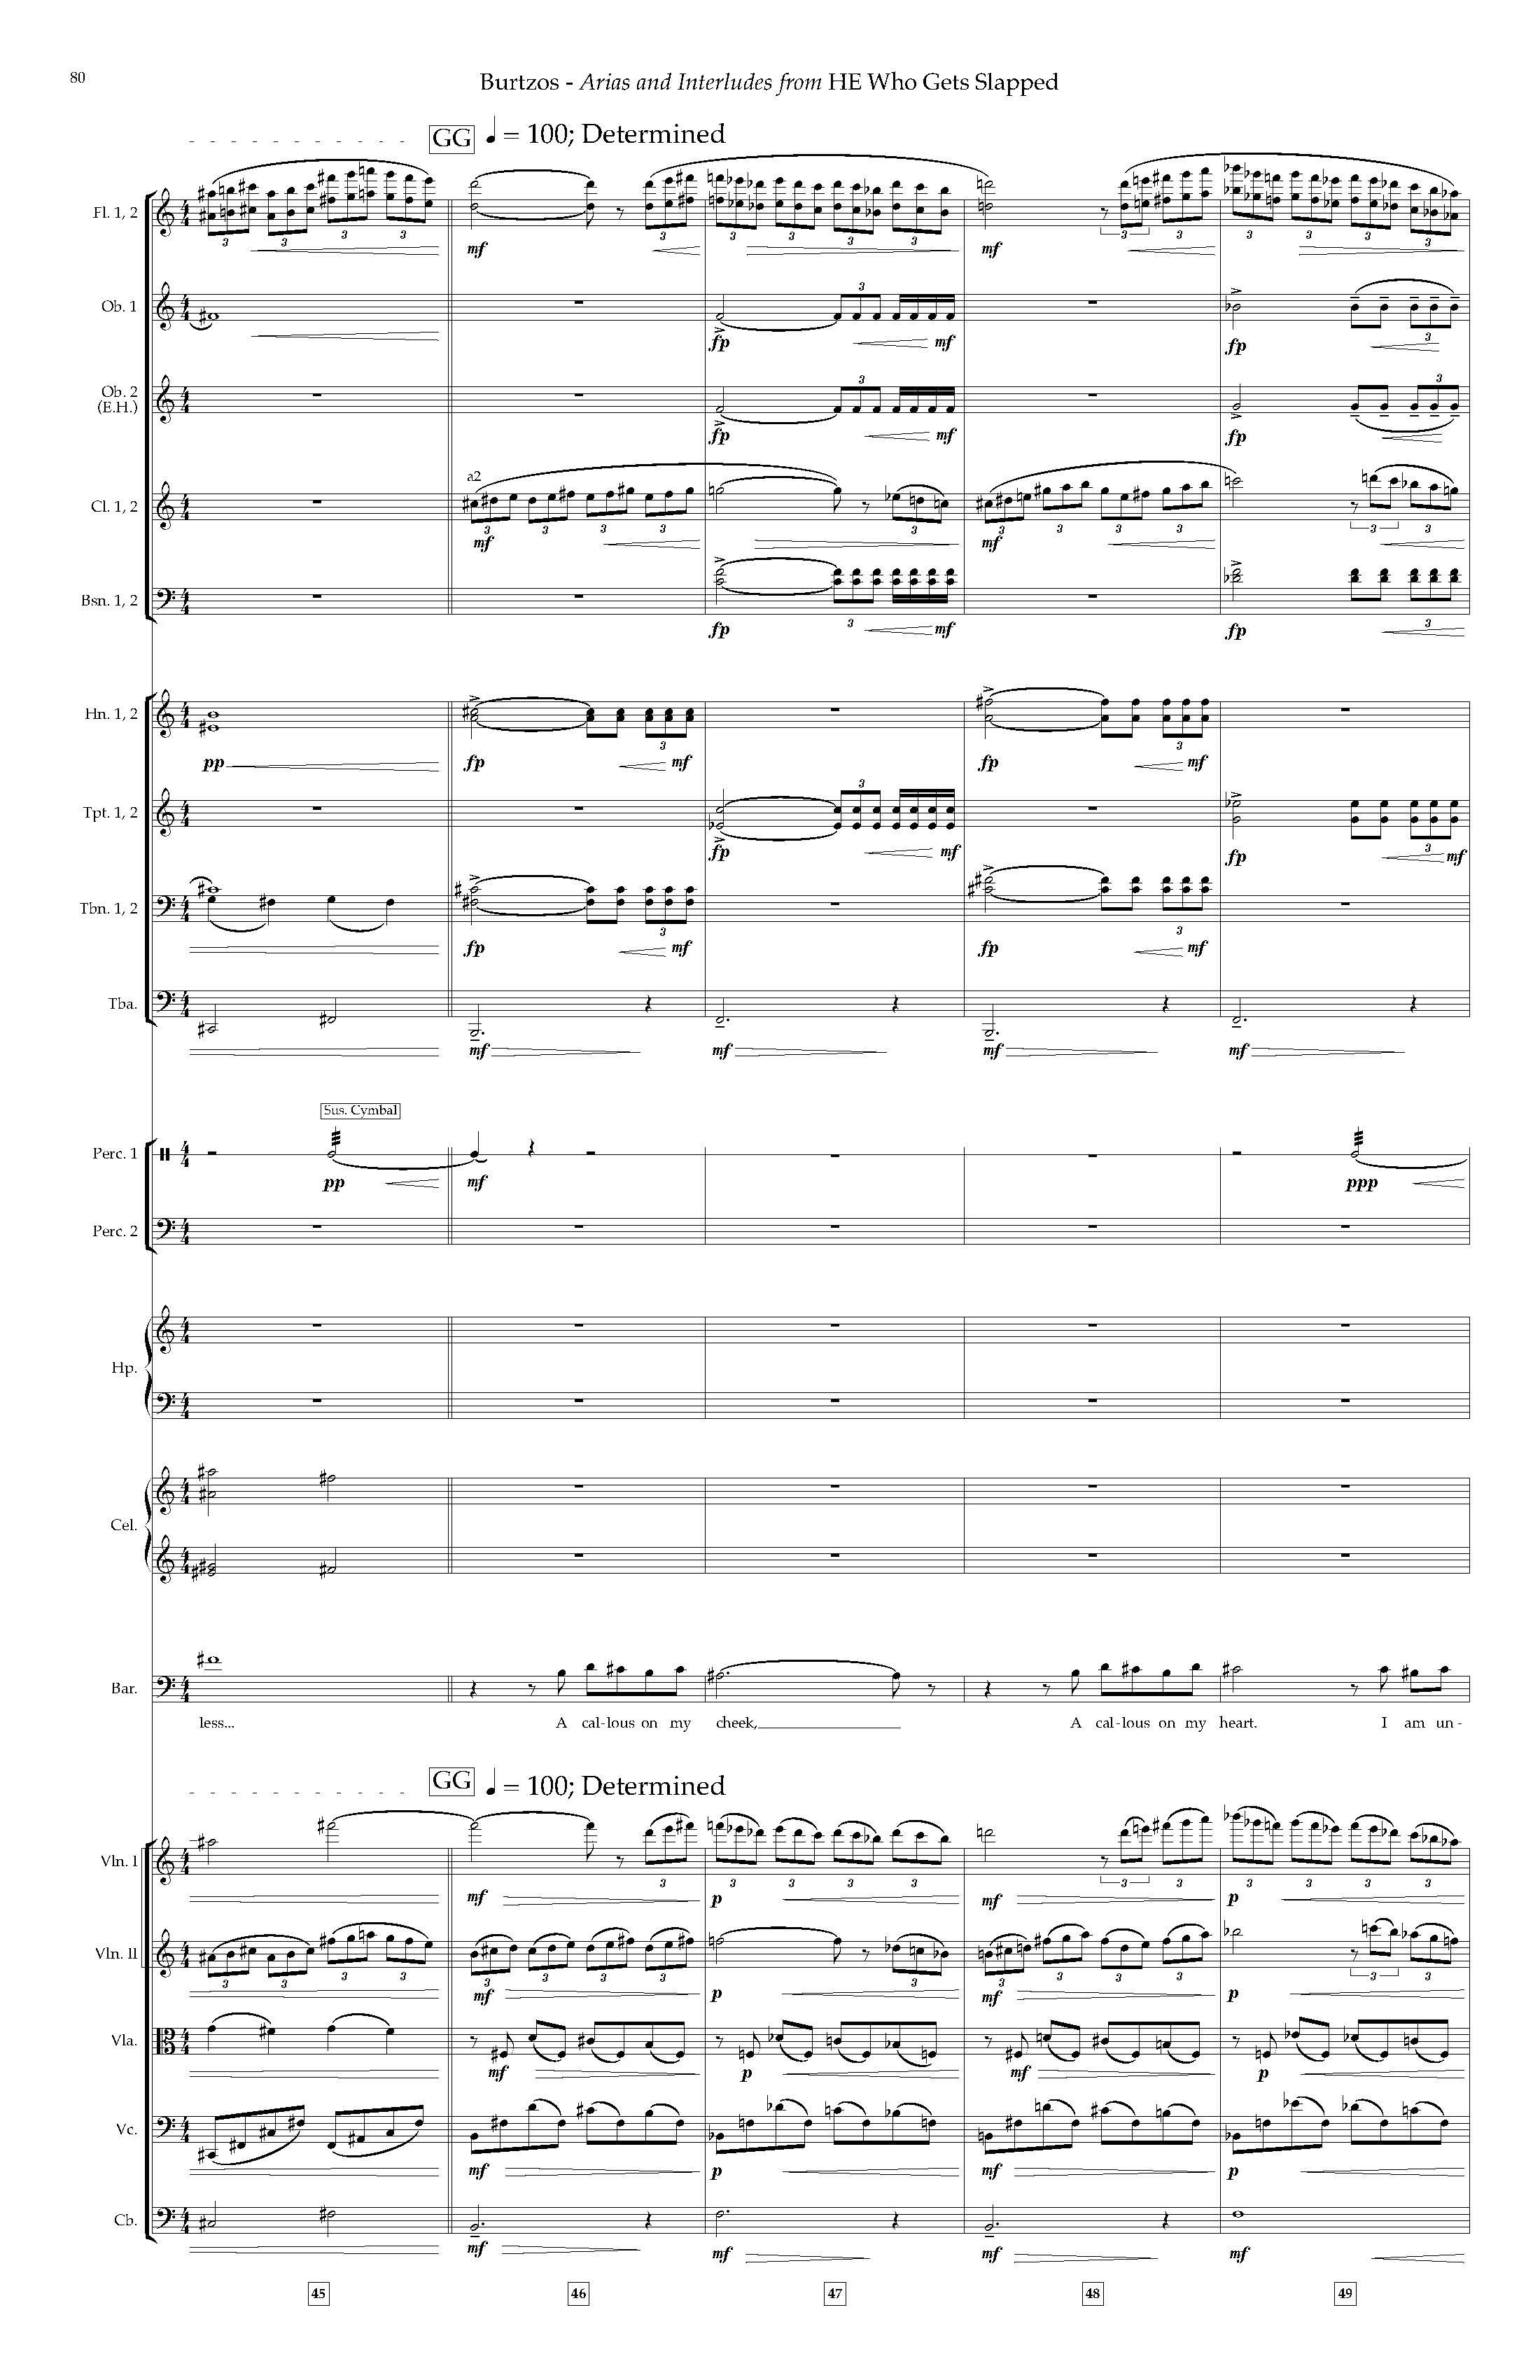 Arias and Interludes from HWGS - Complete Score_Page_86.jpg